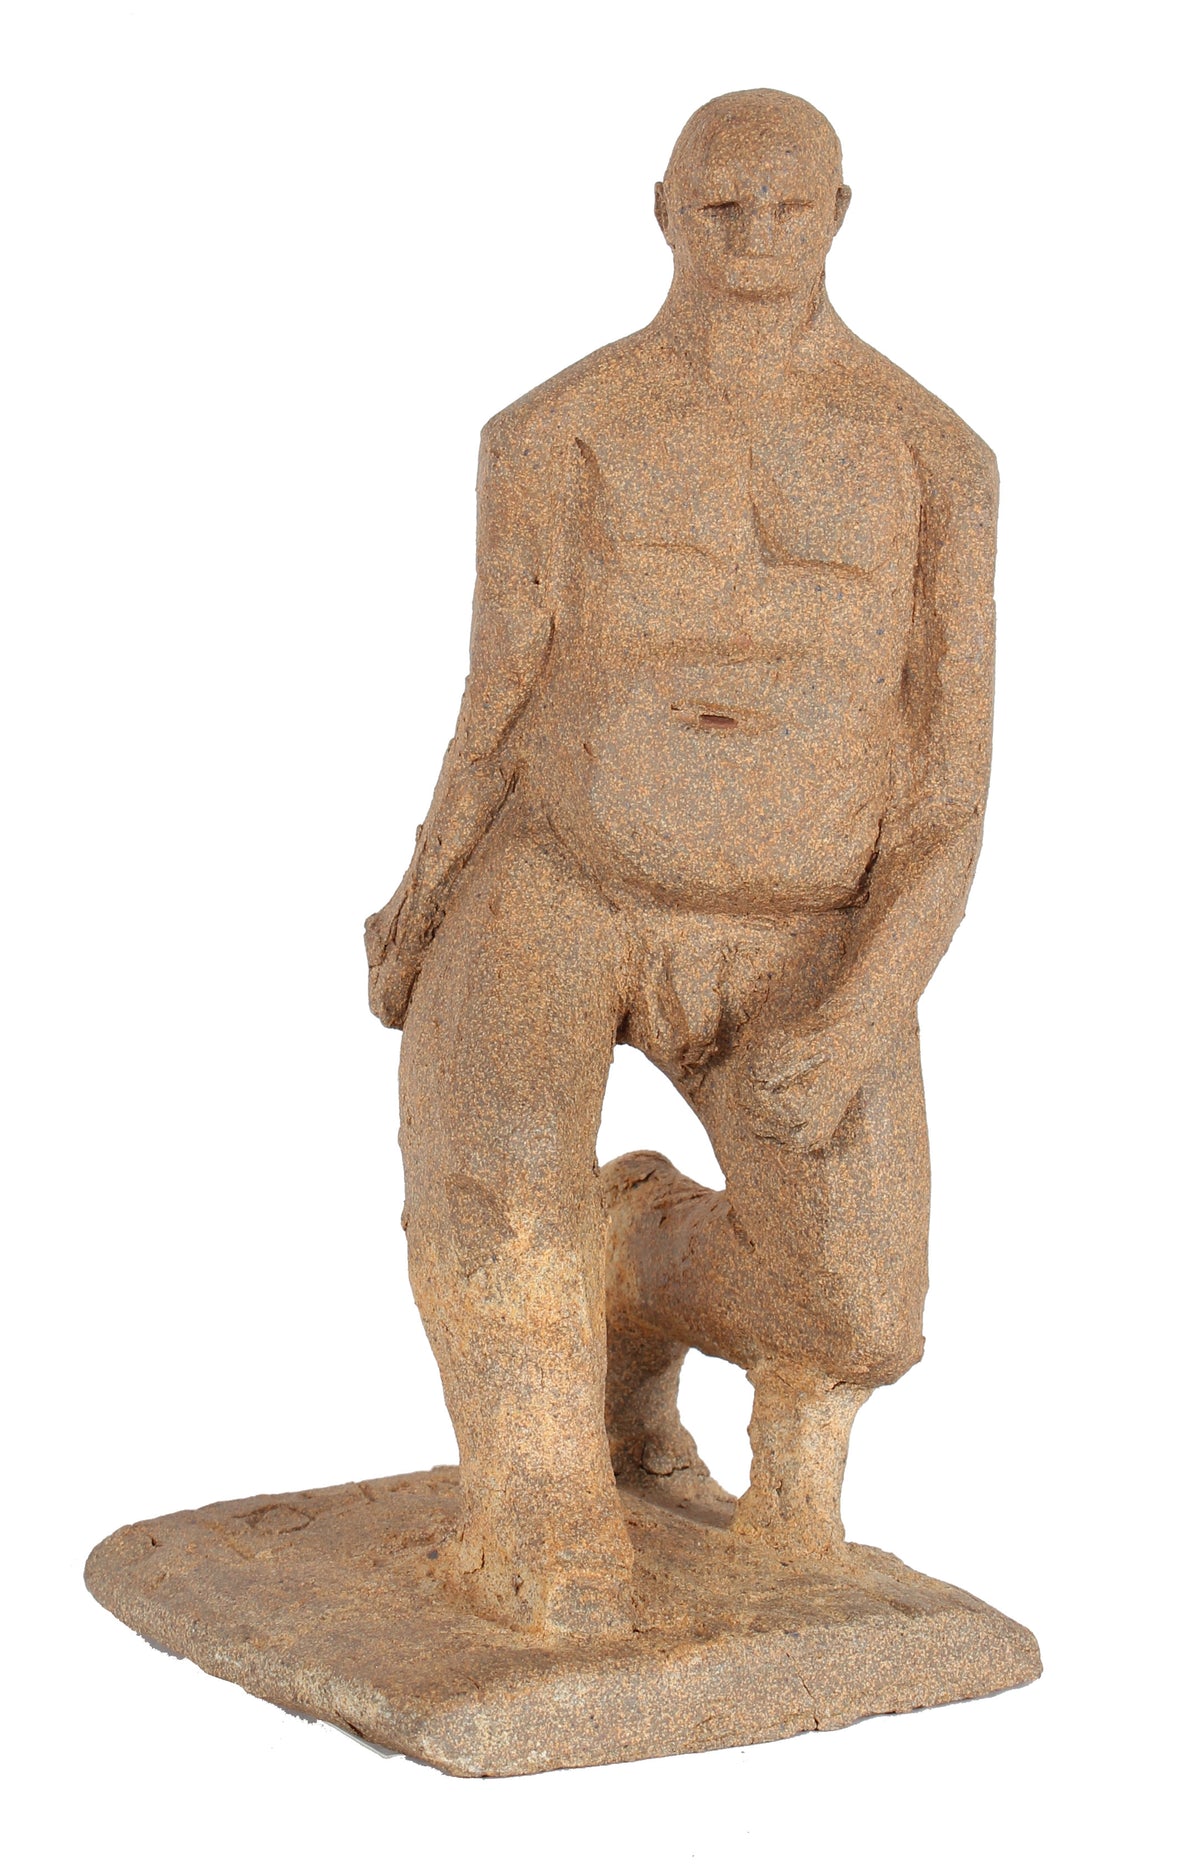 Male Nude in Motion&lt;br&gt;Unglazed Clay, 2007&lt;br&gt;&lt;br&gt;#20284